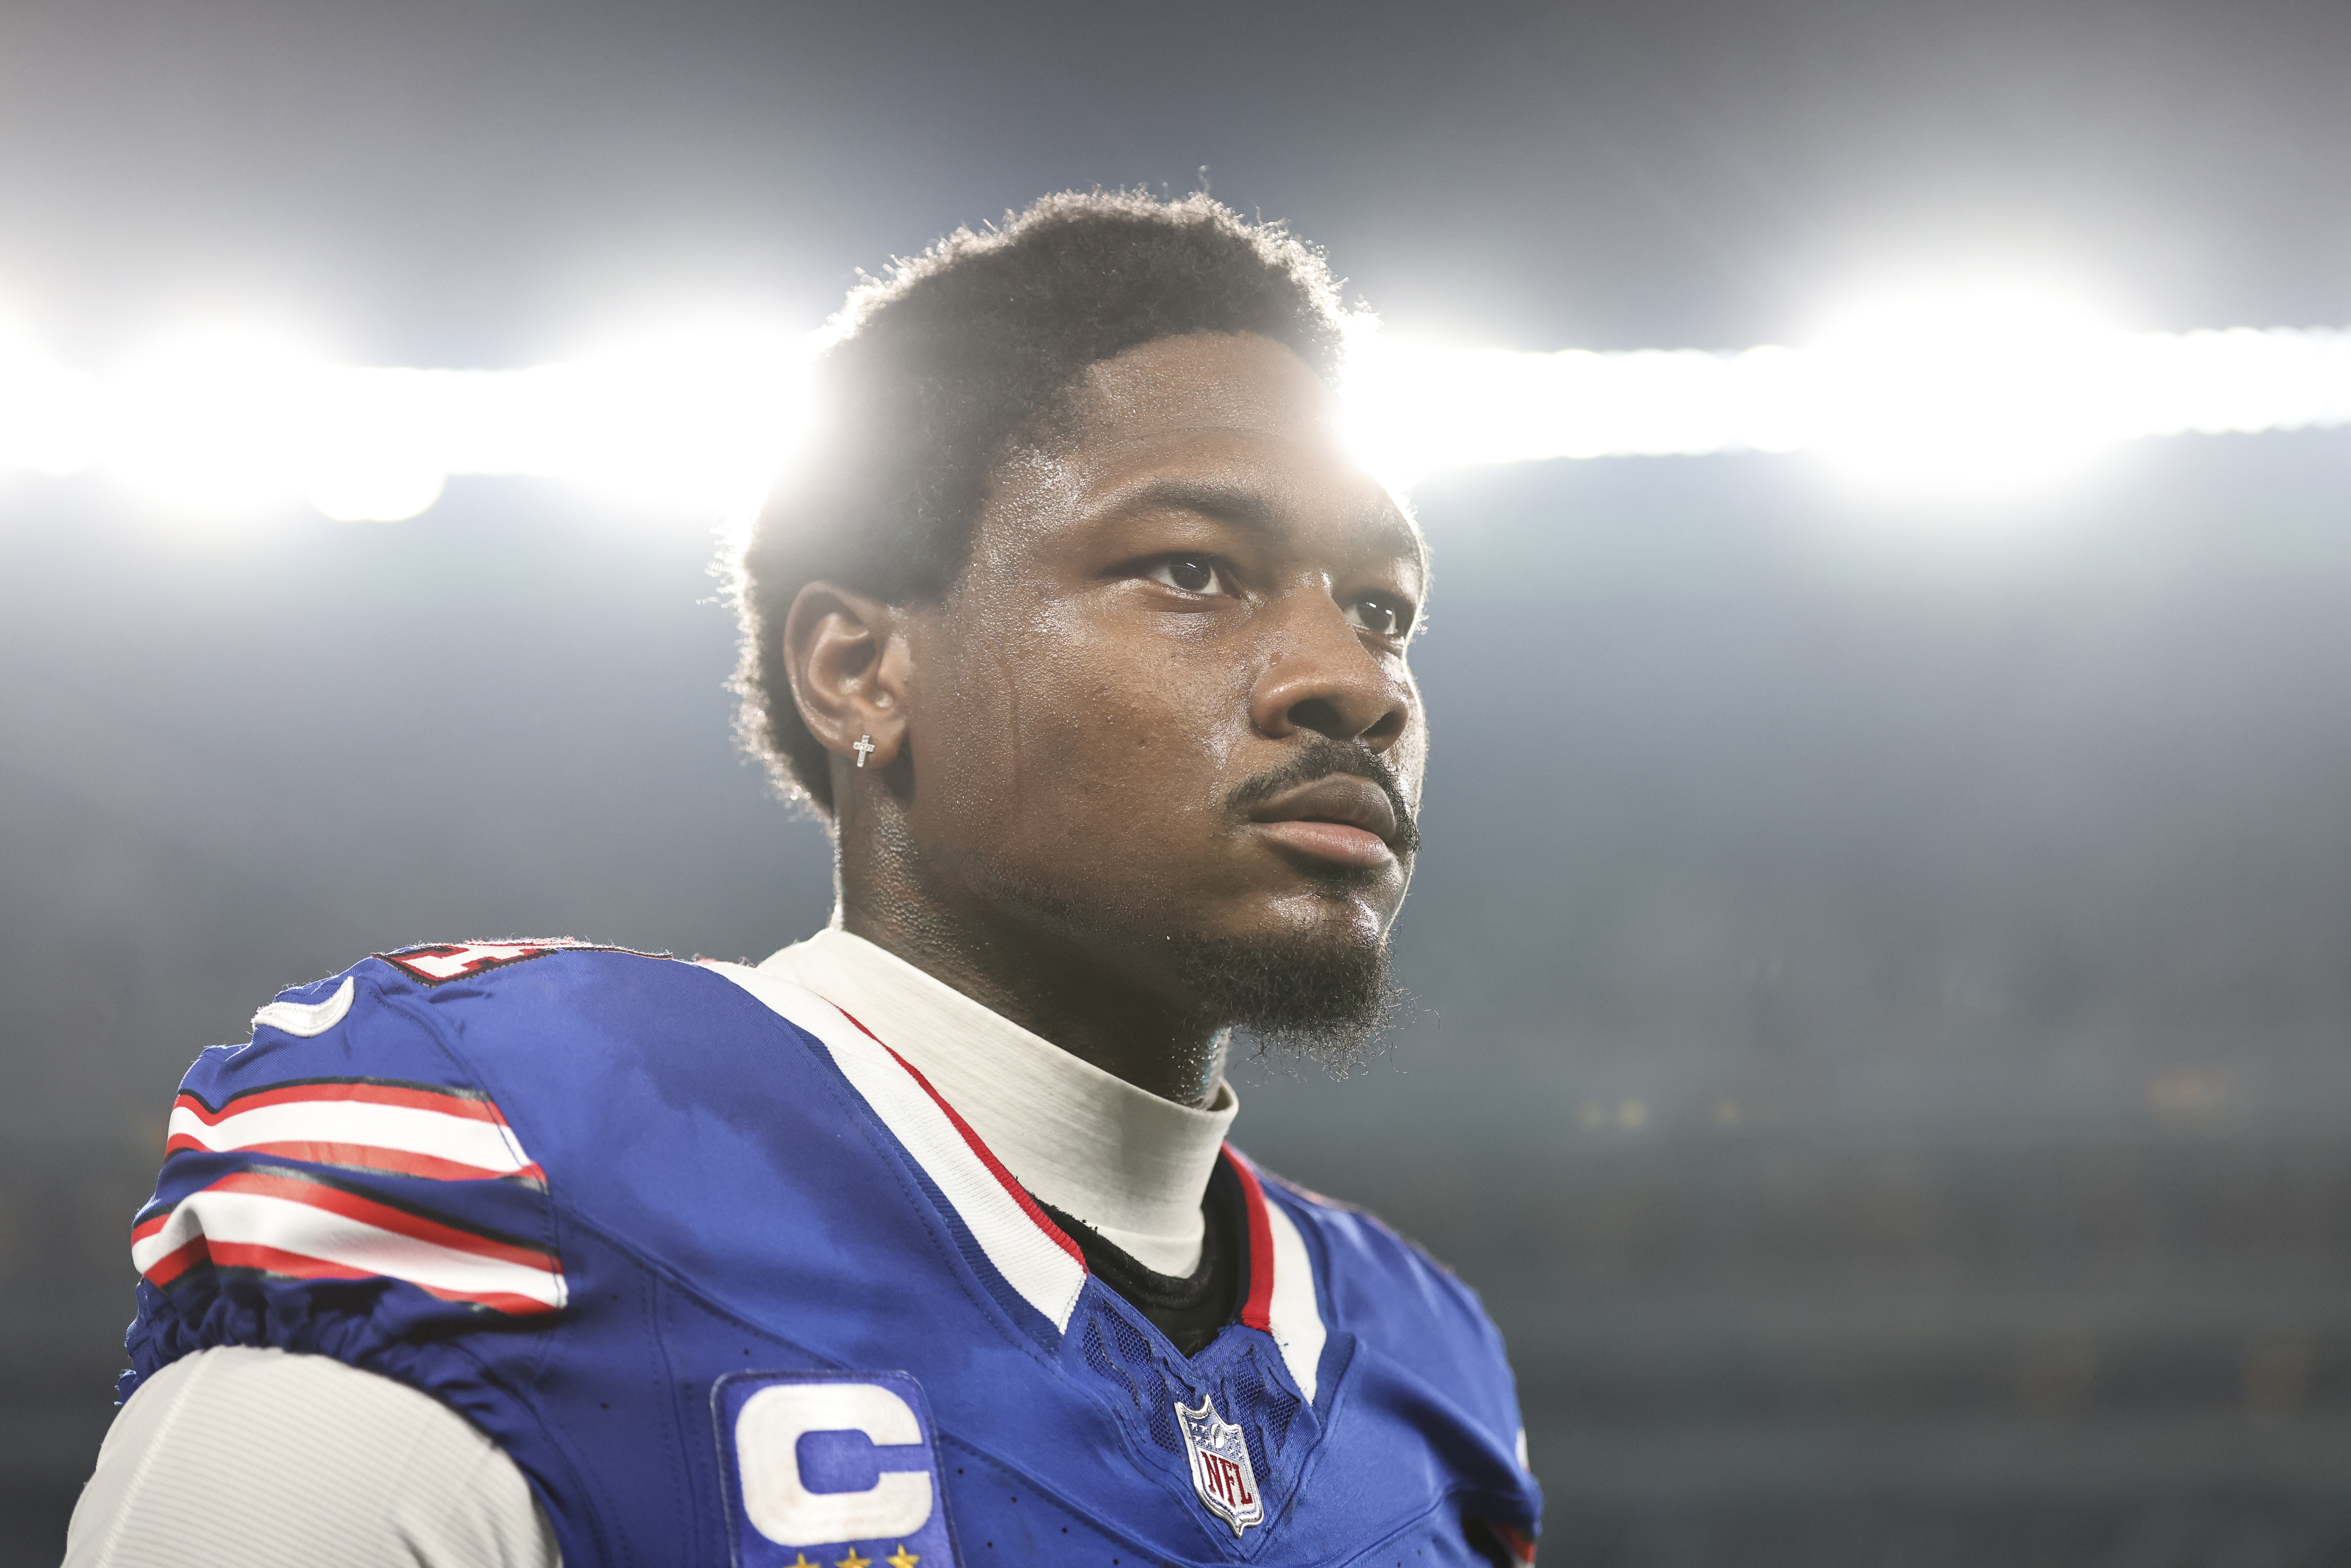 Stefon Diggs during a game between the New York Jets and the Buffalo Bills on September 11, 2023, in East Rutherford, New Jersey. | Source: Getty Images